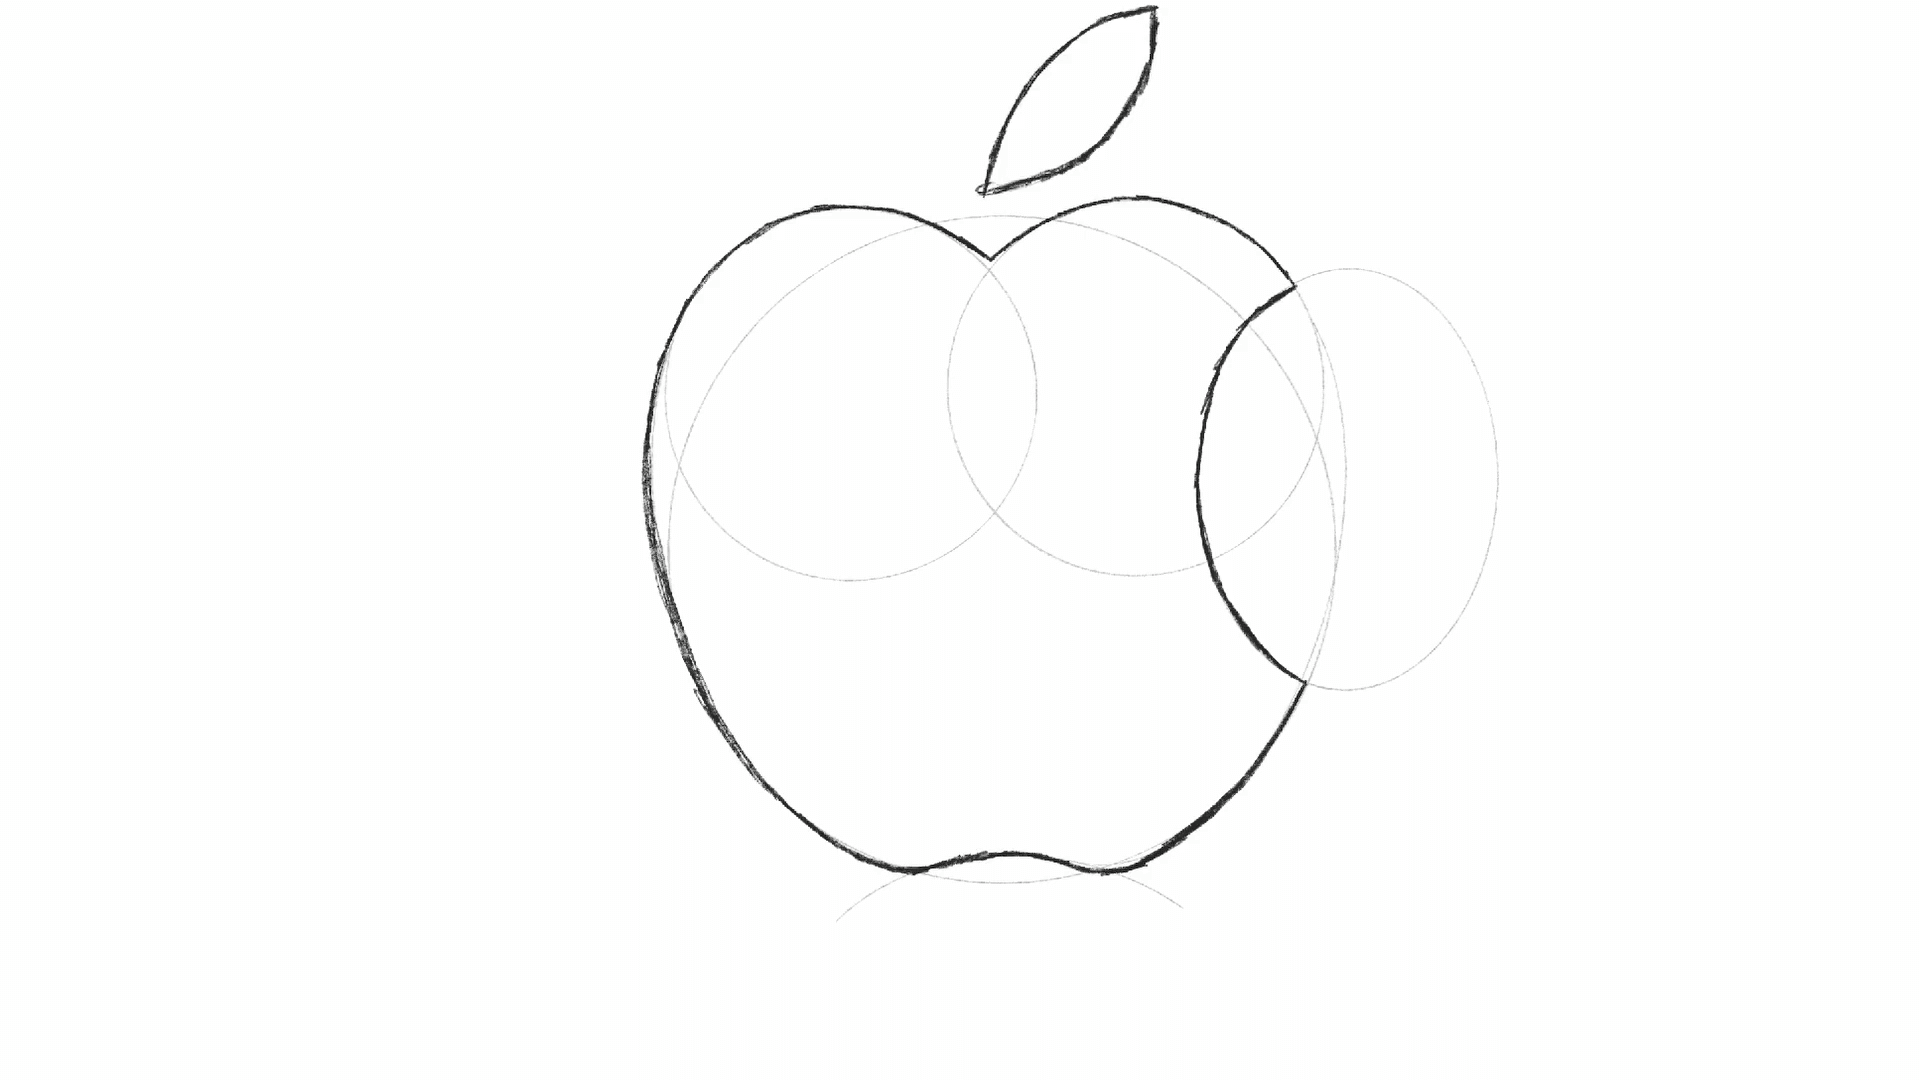 Step 5 of drawing the Apple logo: Trace the apple